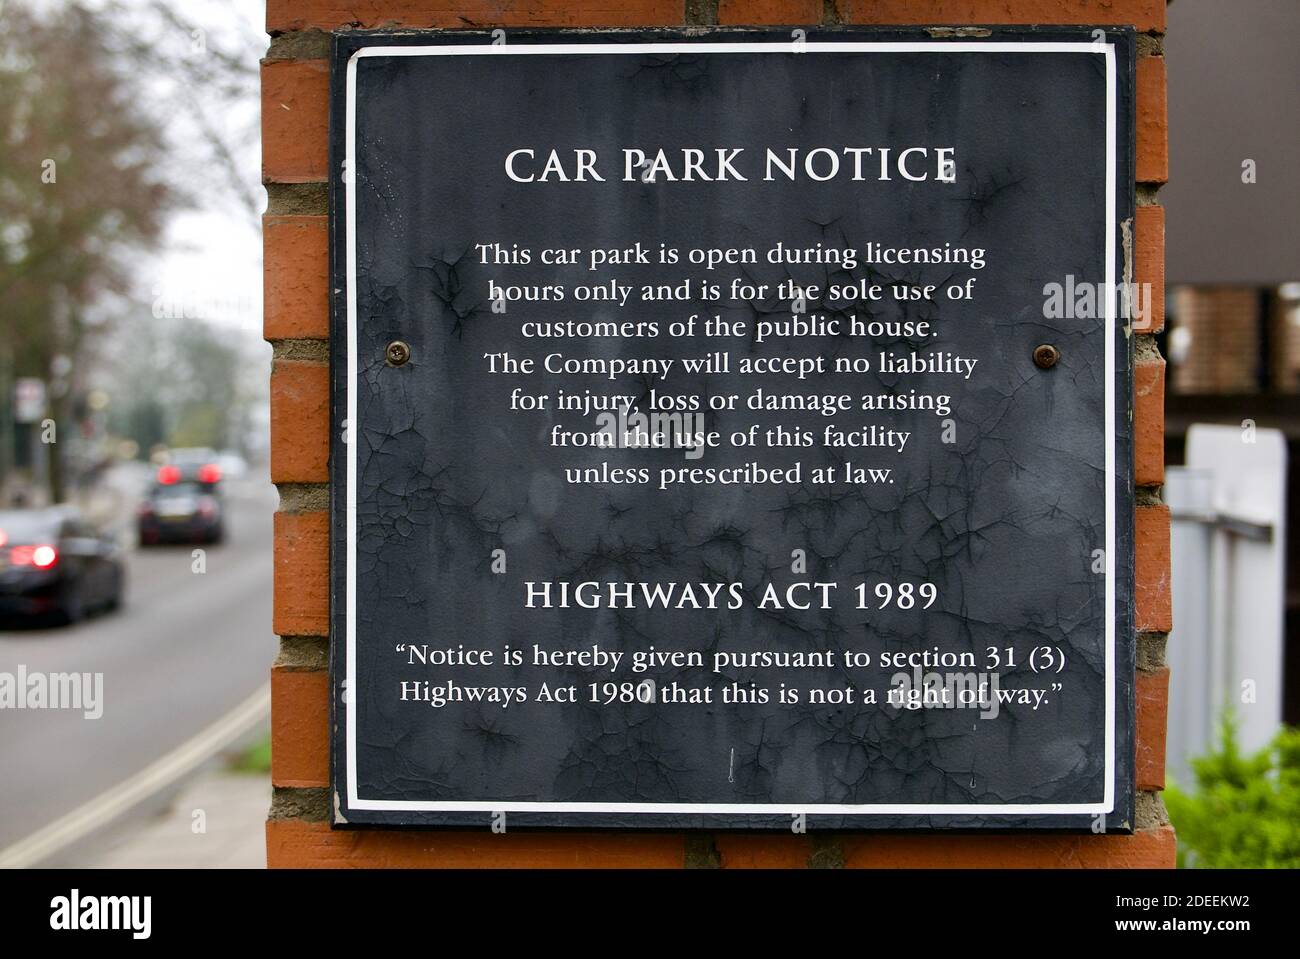 Car Park sign on a pub exterior wall excluding liability for injury, loss or damage and declaring the area not a right of way under Highways Act 1980. Stock Photo